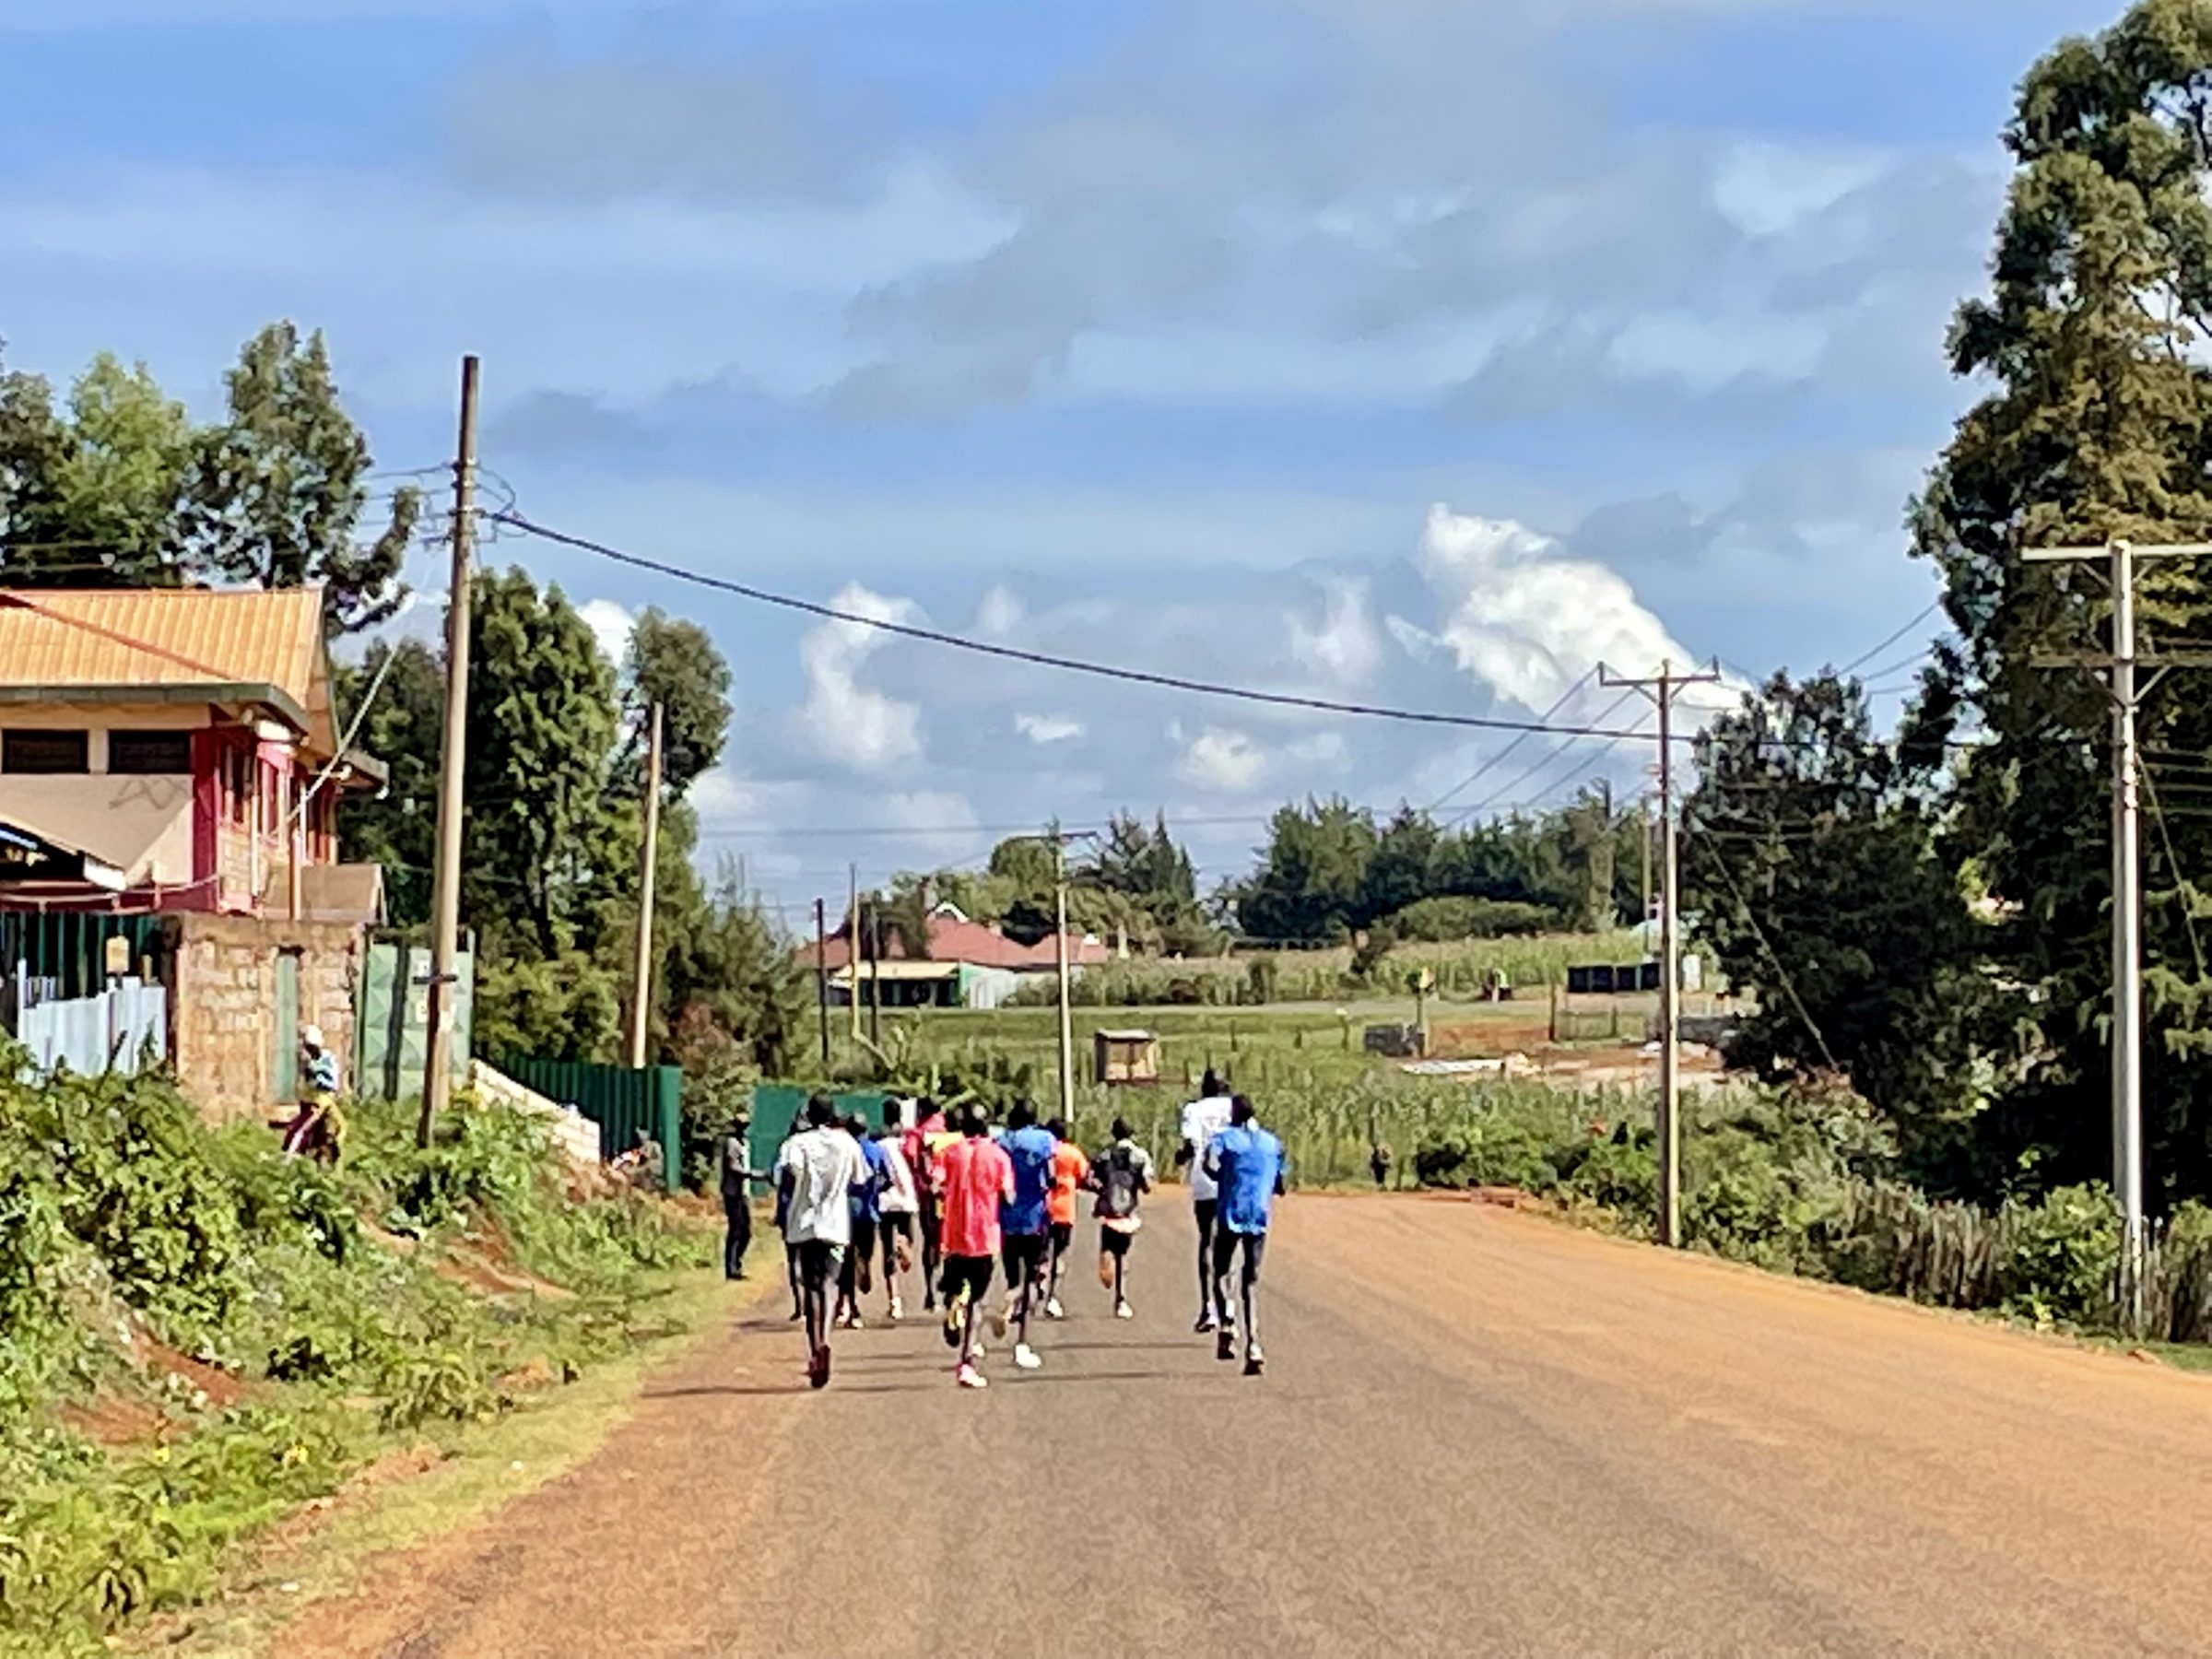 You can practice for the marathon in Iten